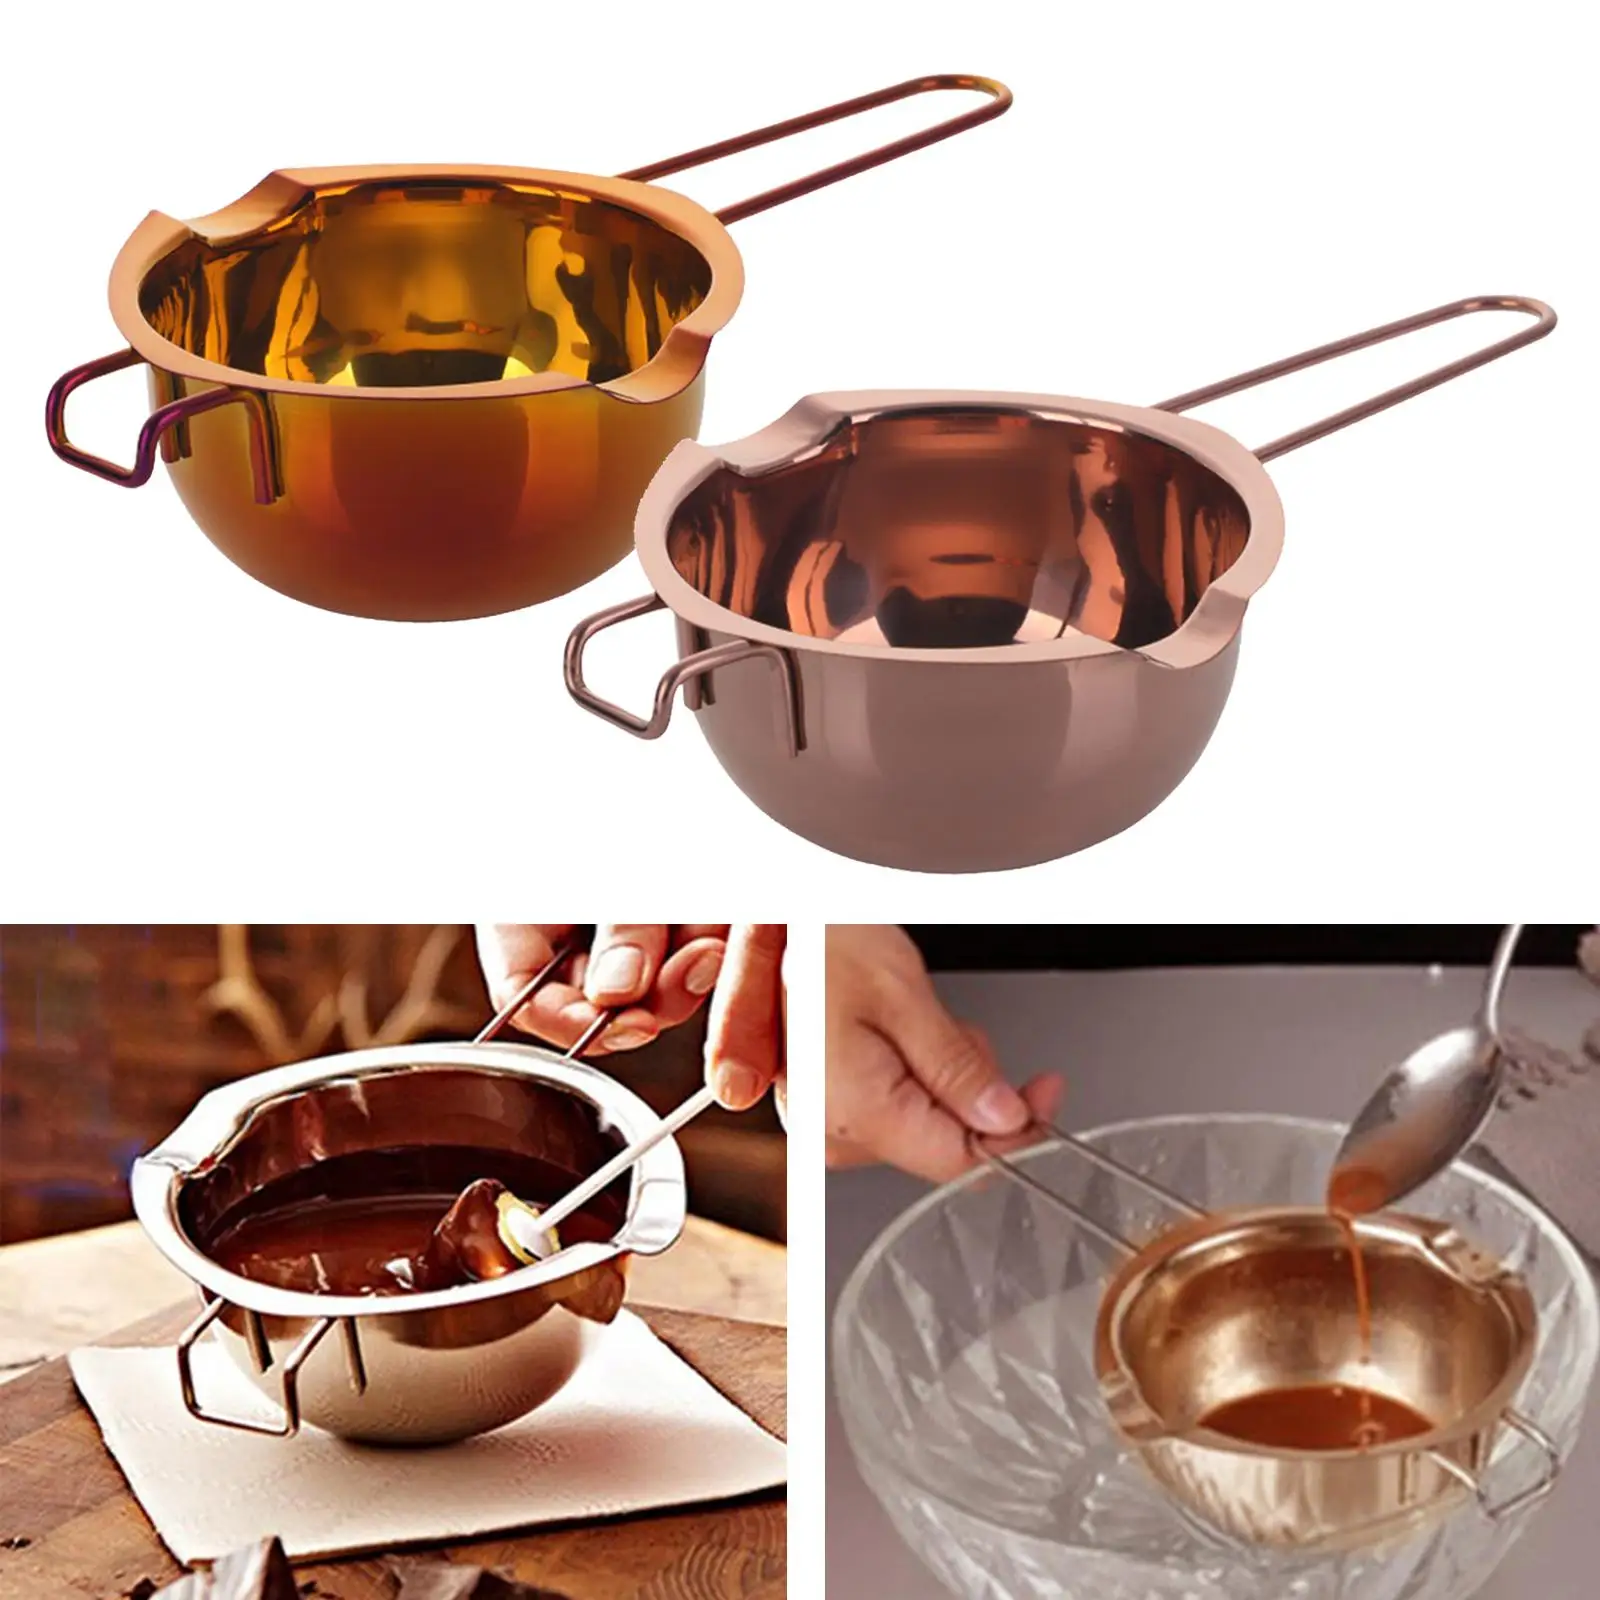 400ml Stainless Steel Double Boiler Pot for Melting Chocolate, Candy, Candle Use and Clean Easily ,Flat Bottom Long Durability